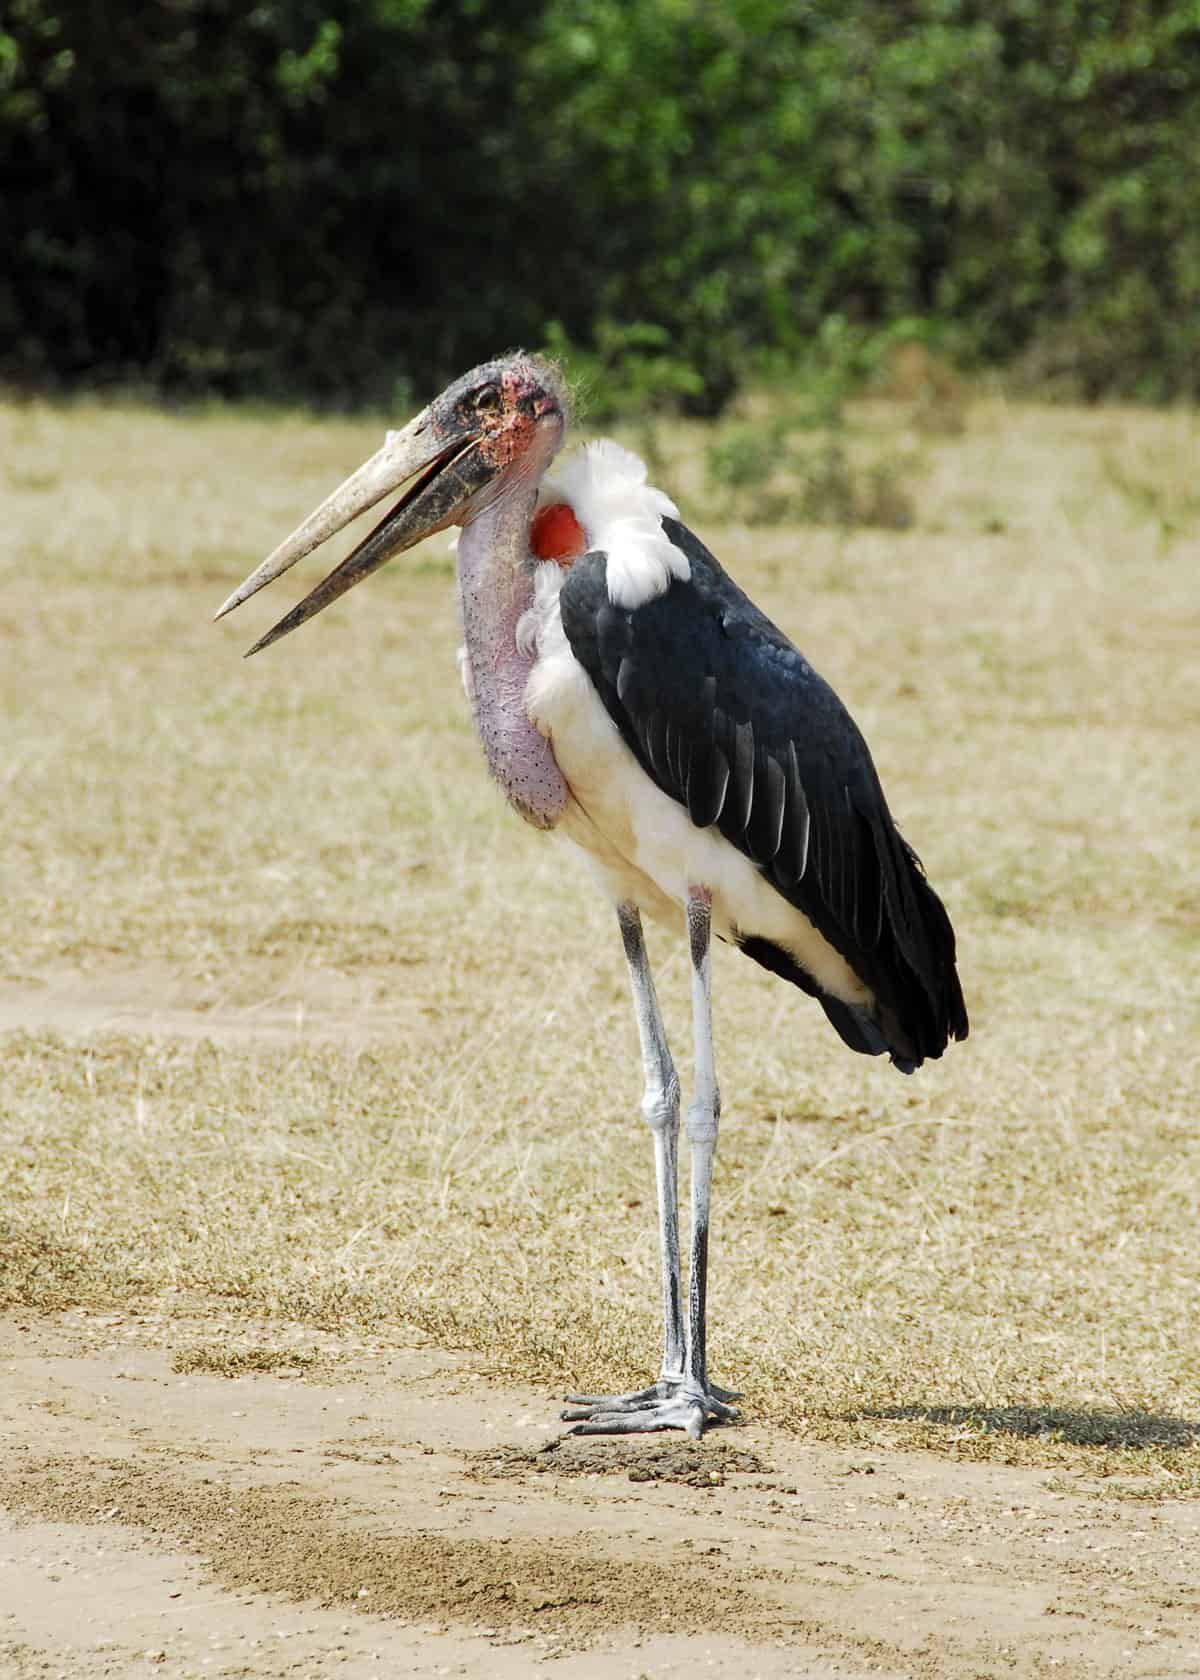 Marabou stork facts | Uganda: Things to do, places to see ...